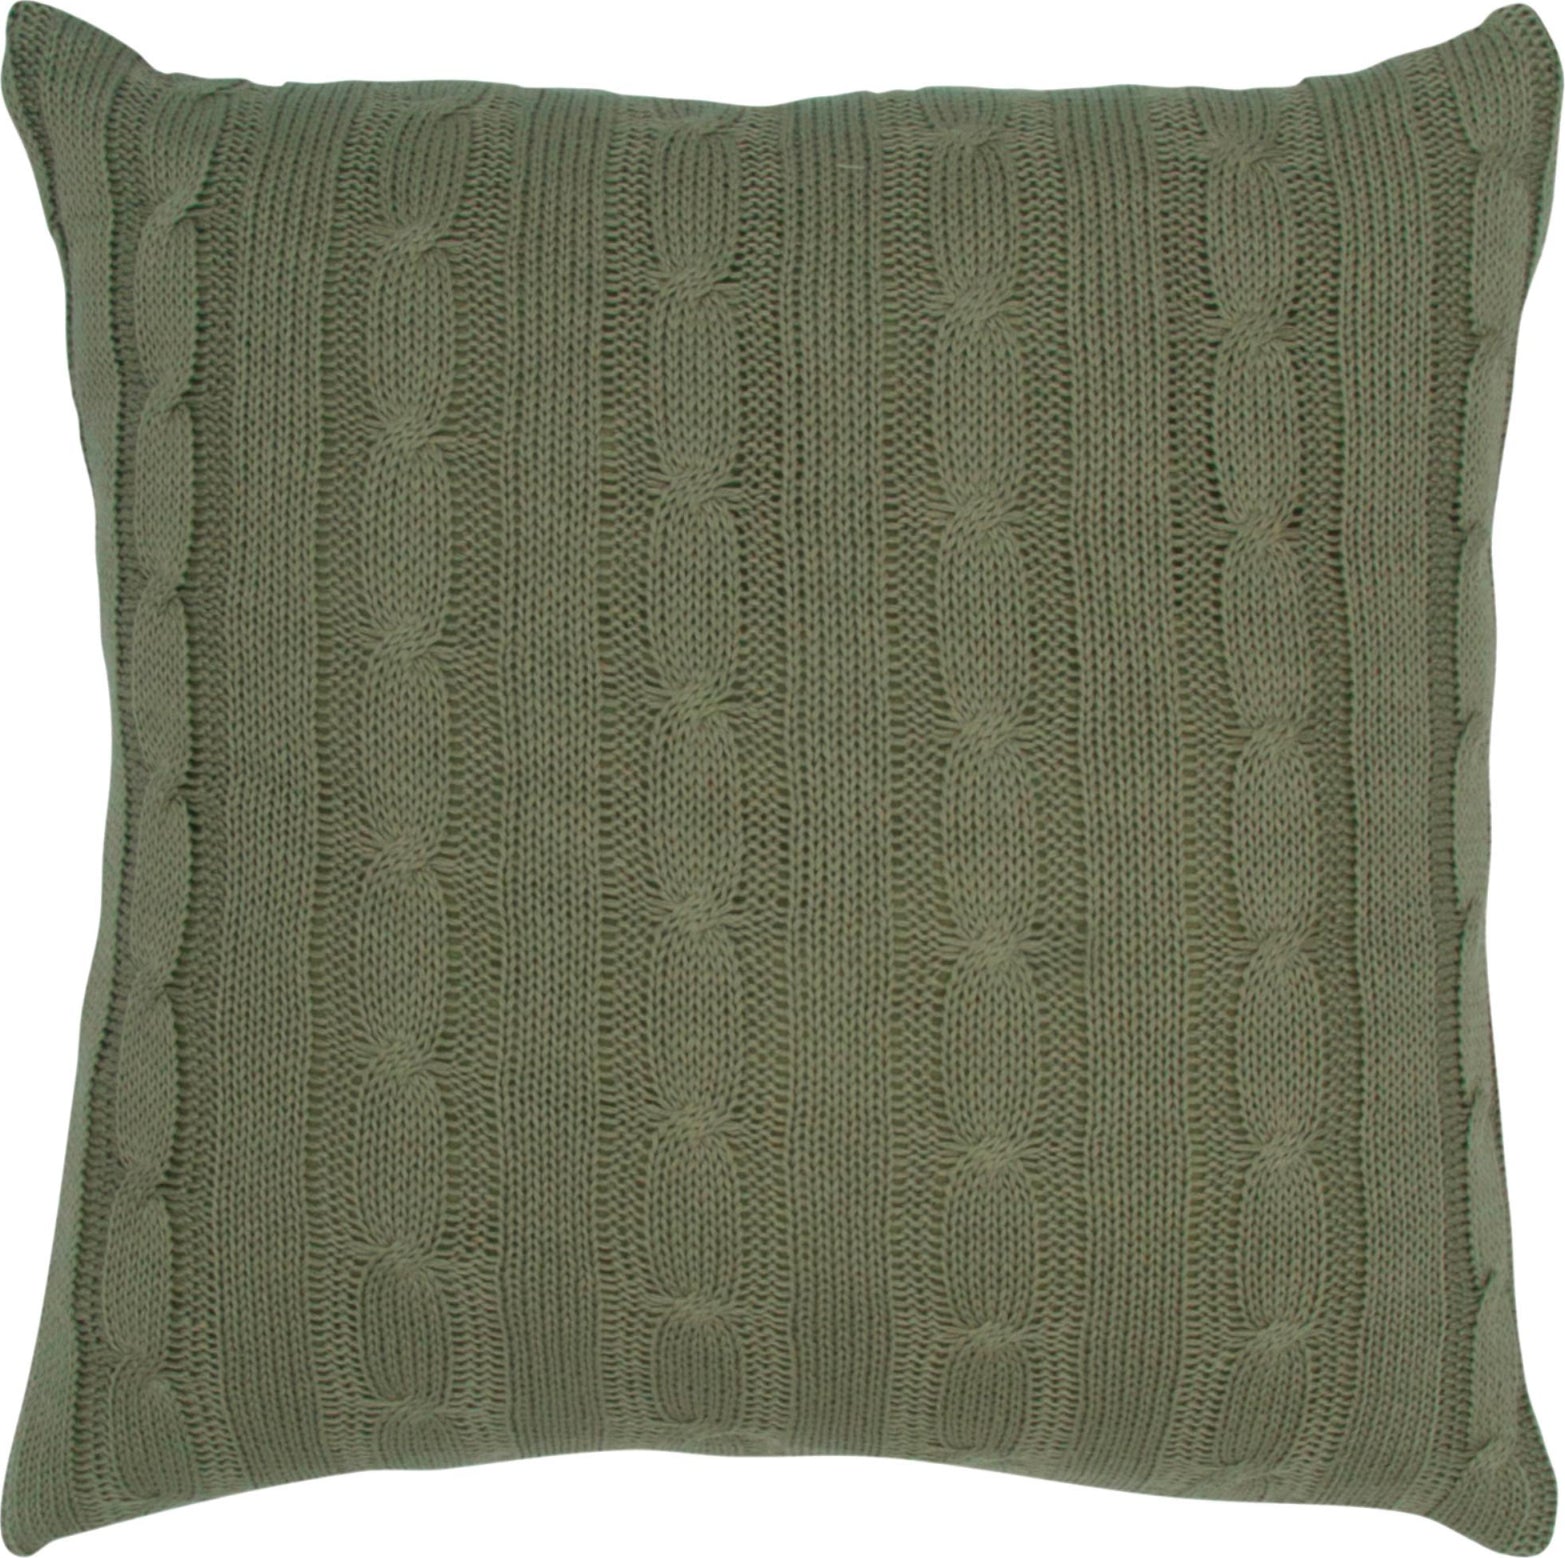 Rizzy Pillows T05065 Olive